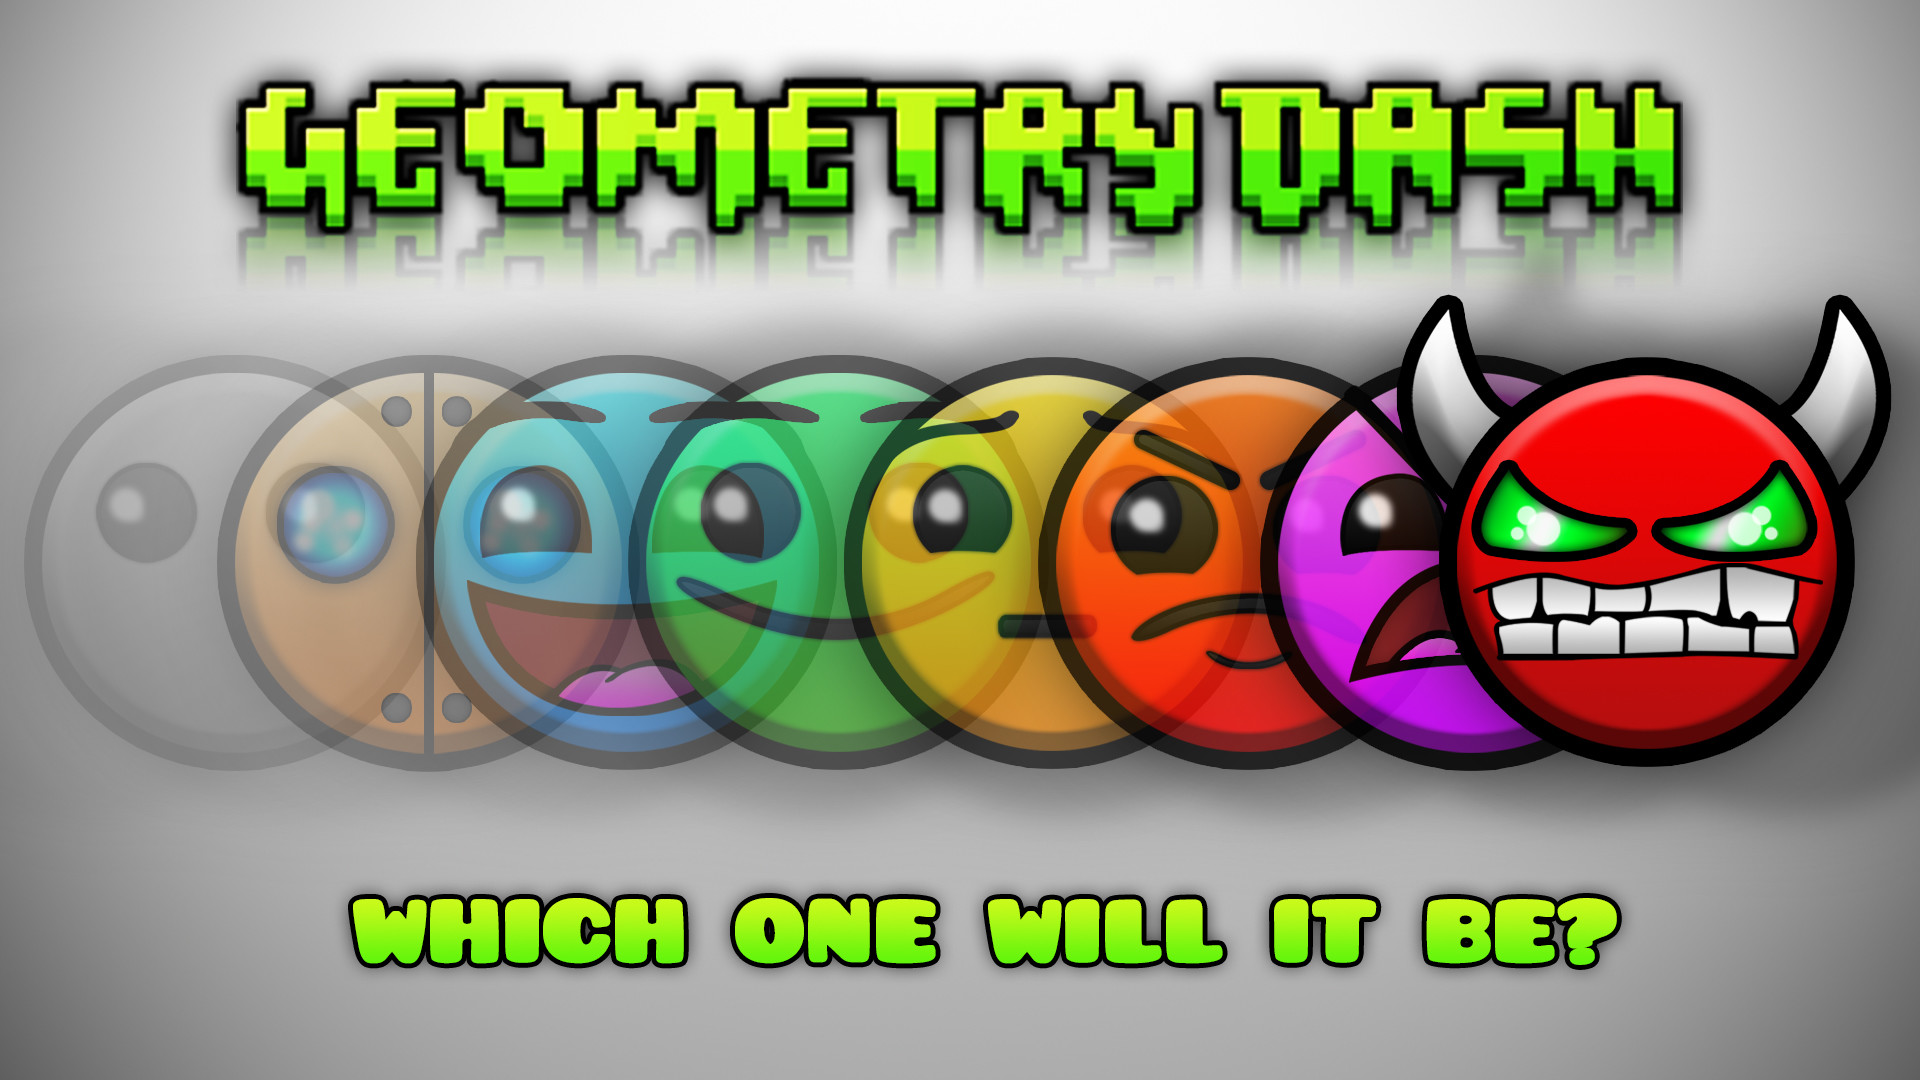 1920x1080 Geometry Dash Difficulty Wallpaper by TomPlumpton Geometry Dash Difficulty  Wallpaper by TomPlumpton